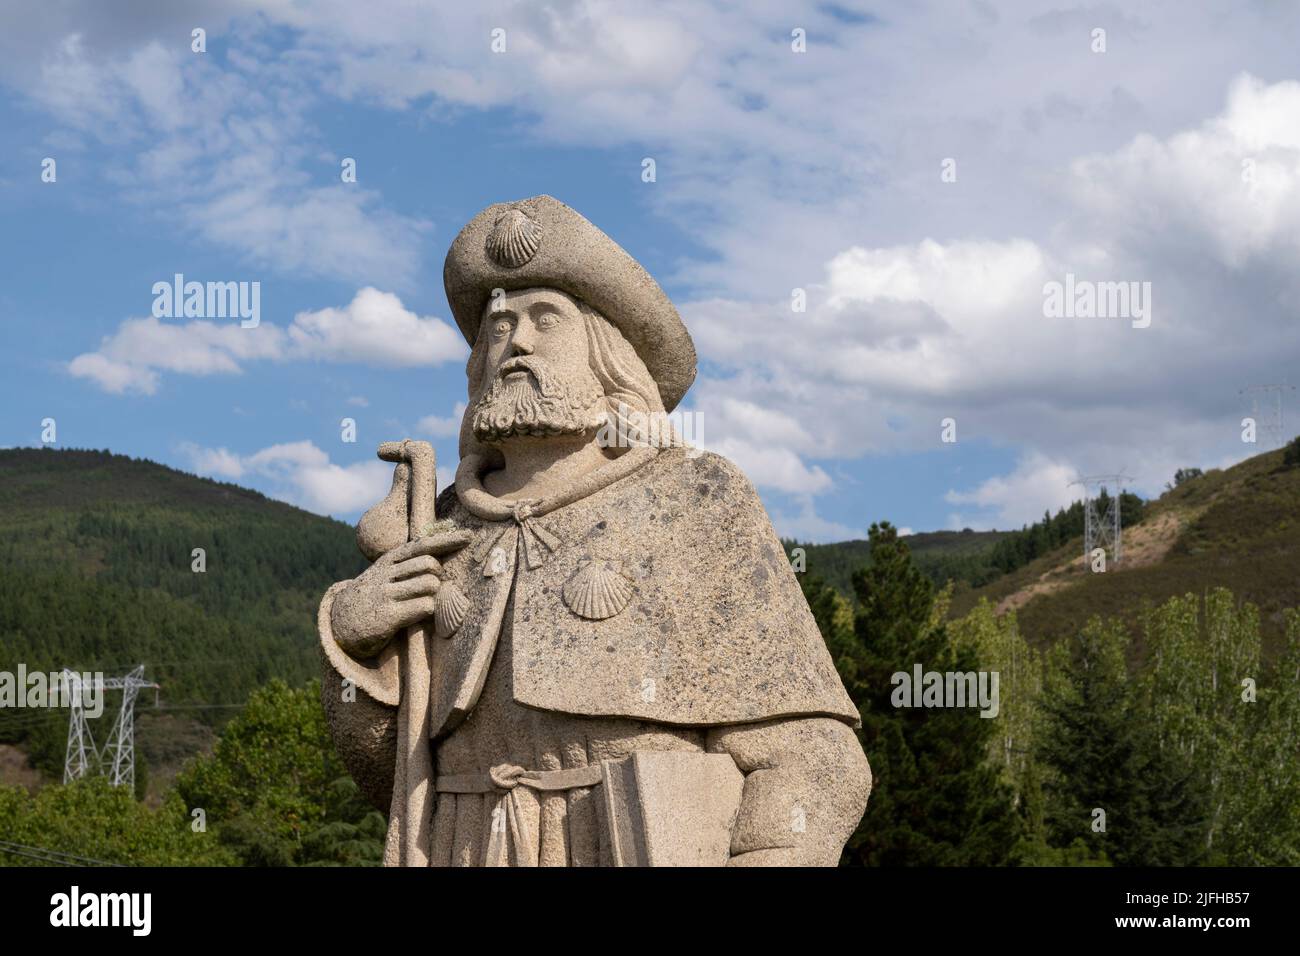 Statue of Santiago Peregrino (St James the Great as a pilgrim) shown with customary cloak, scallop shells, staff and gourd along the Camino Frances in Stock Photo